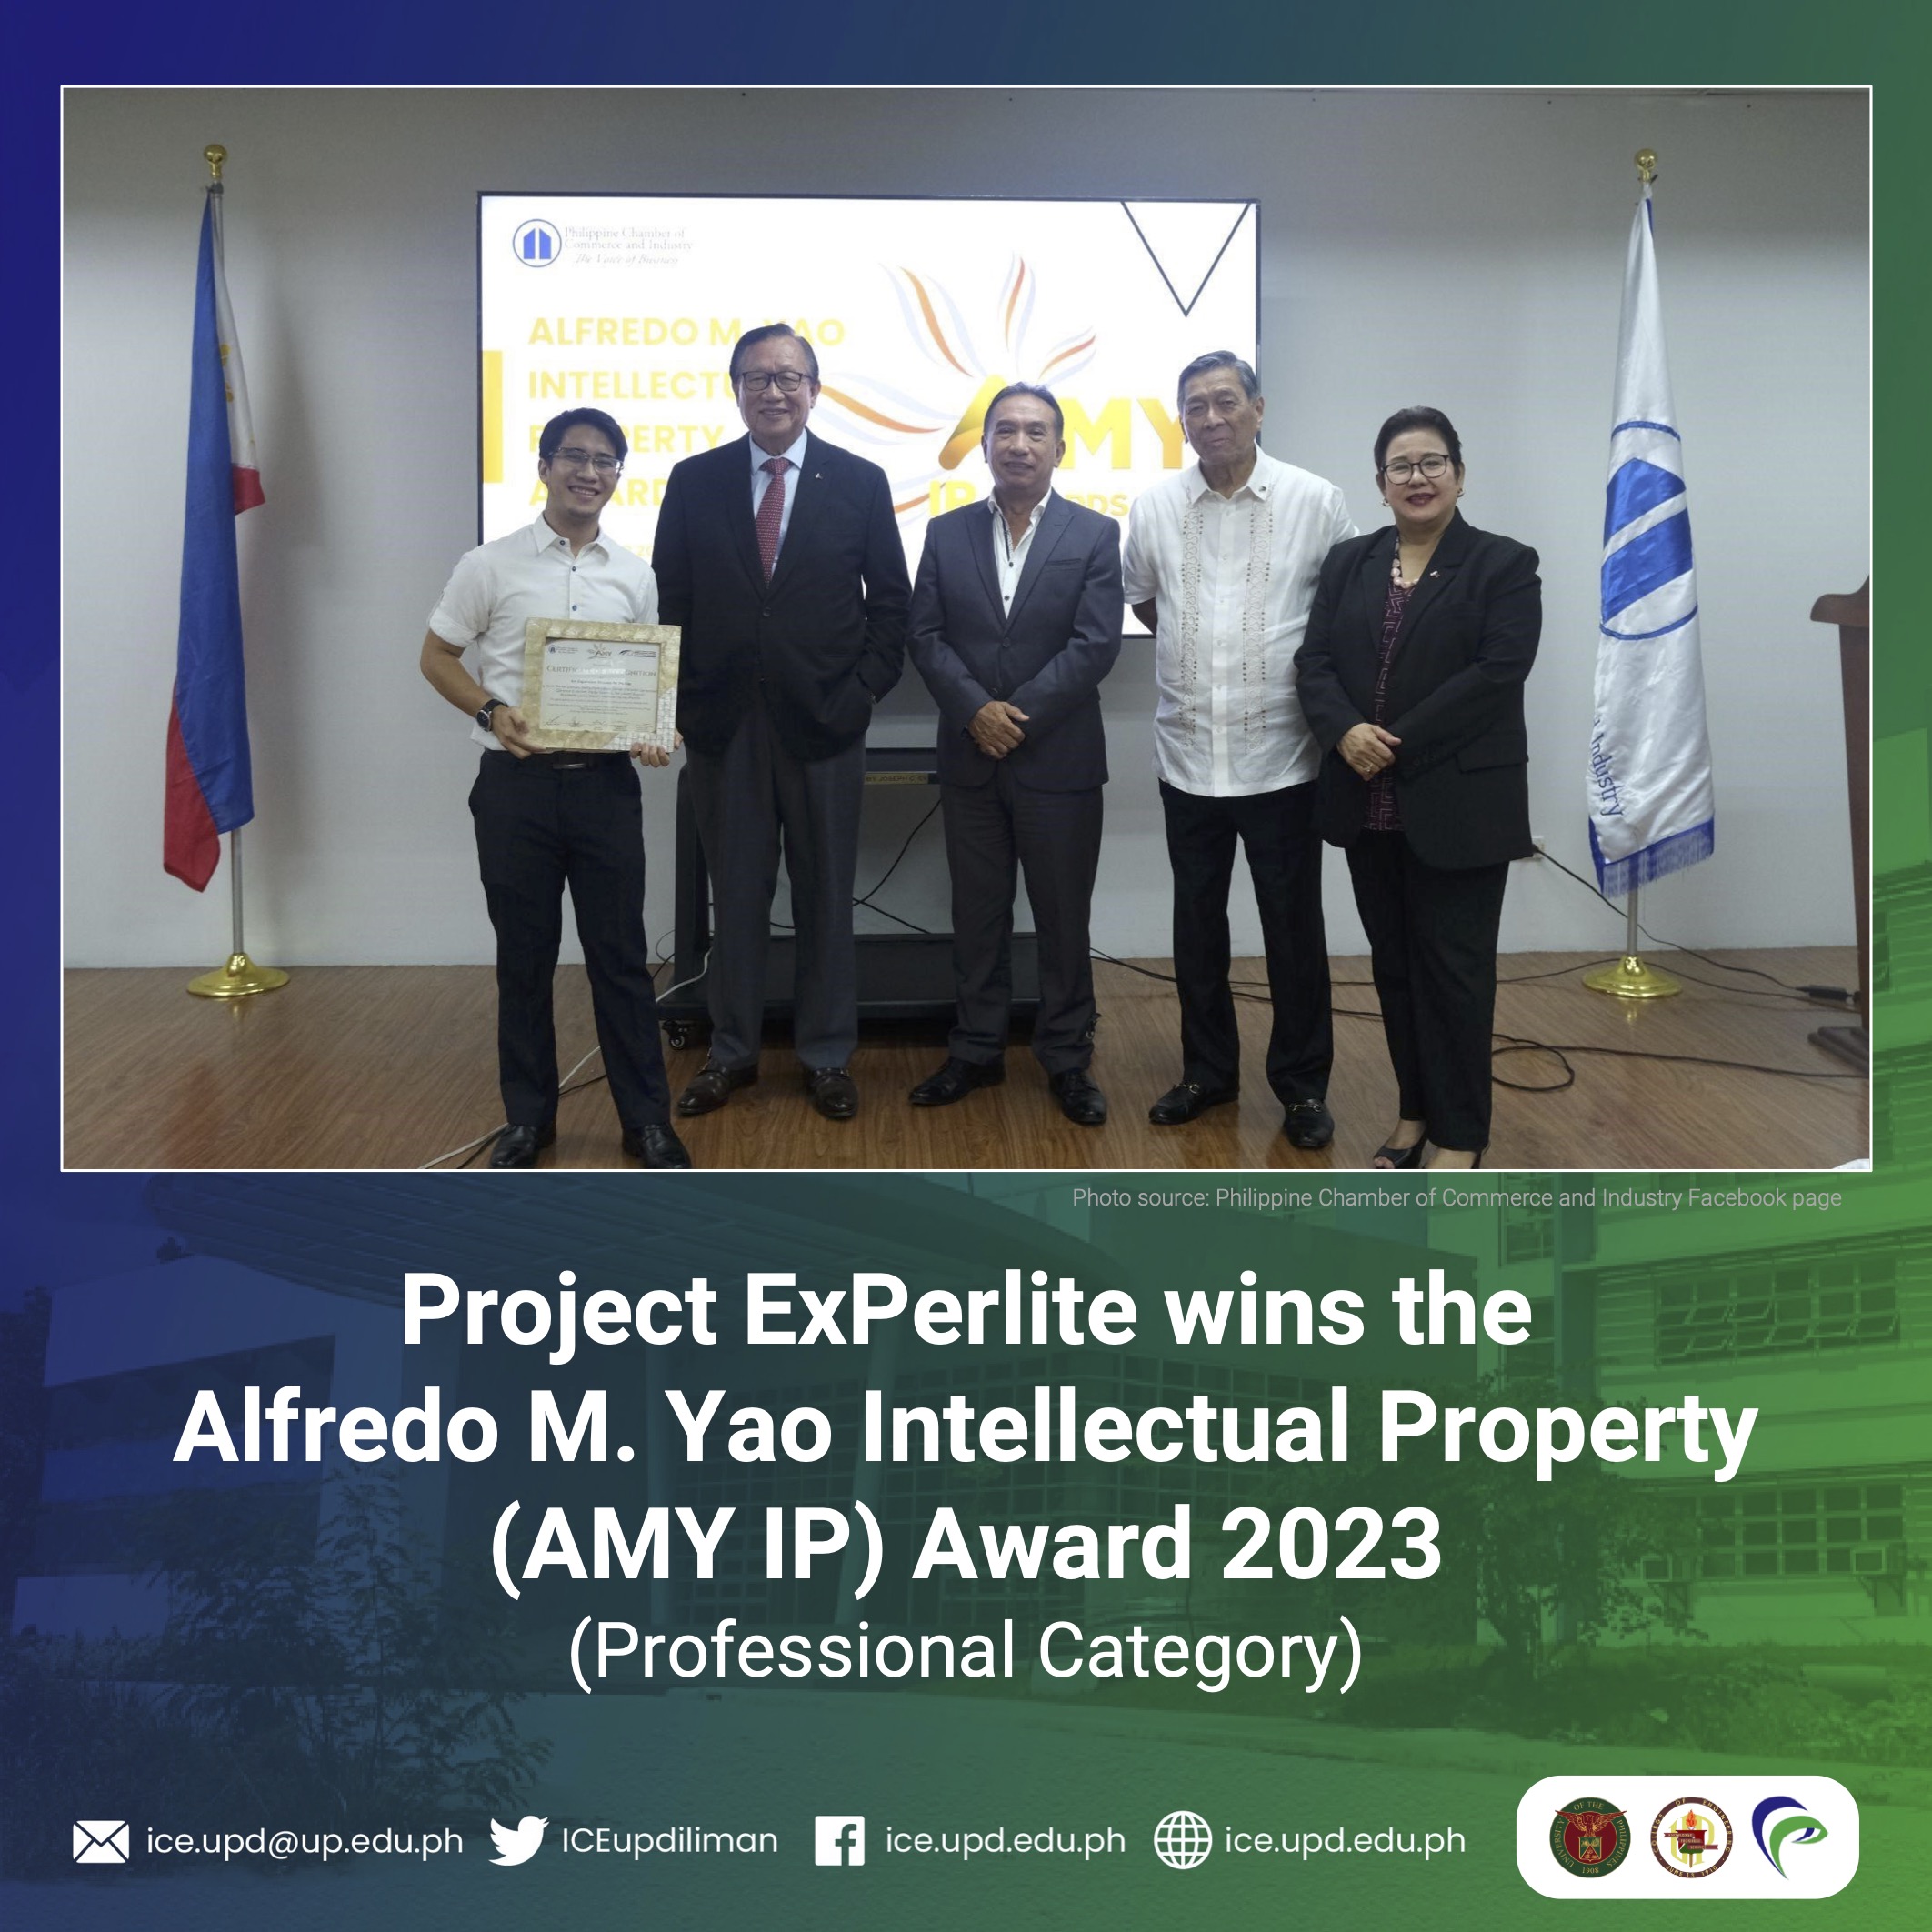 Project ExPerlite wins the AMY IP Award 2023 (Professional Category)